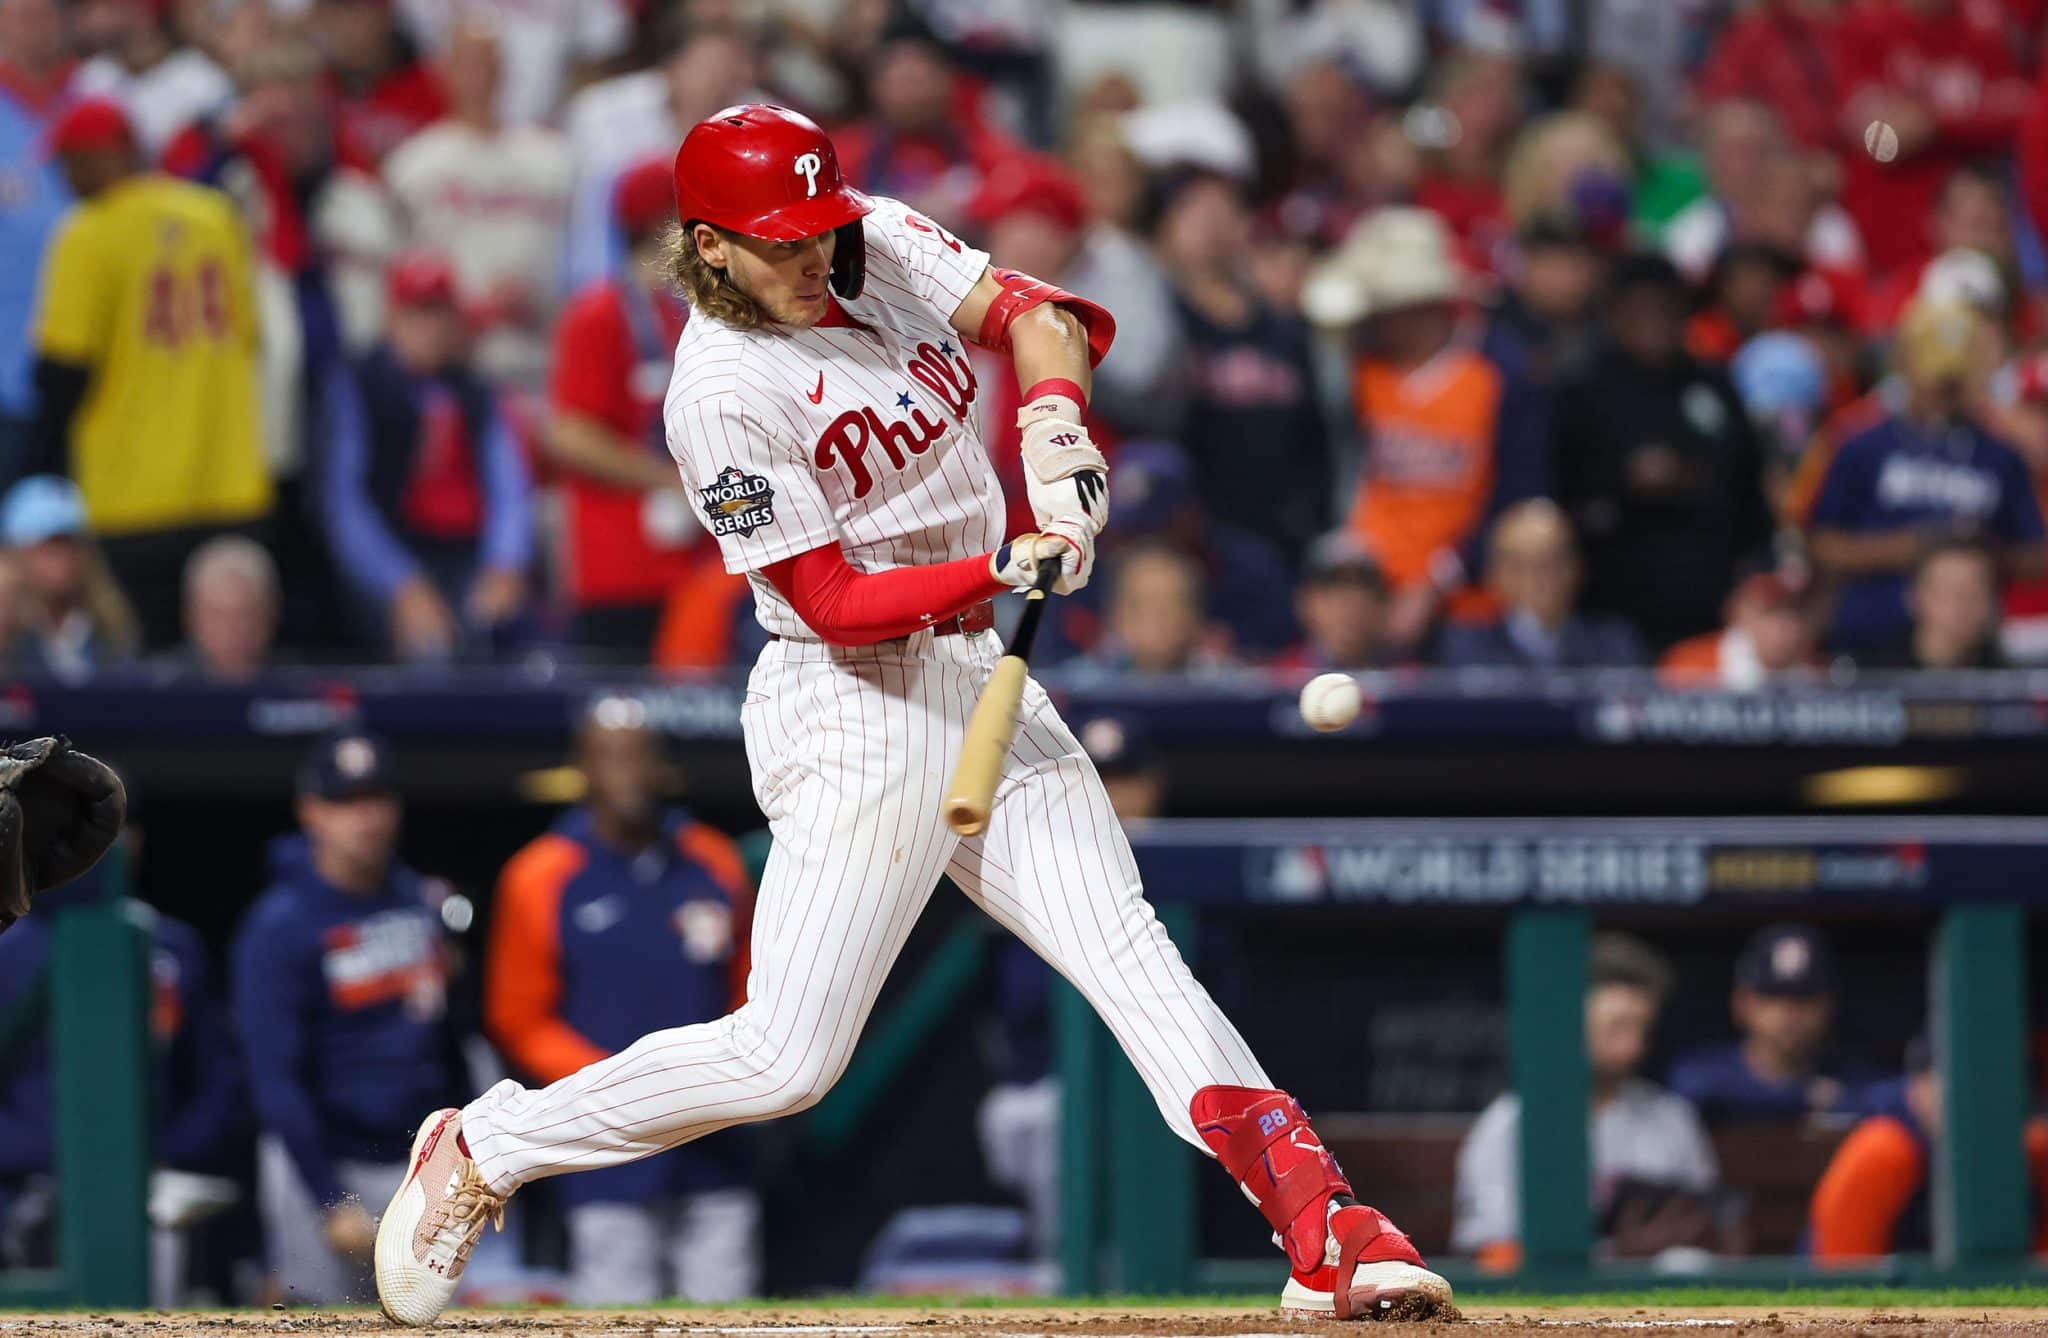 The Phillies’ Dingers Literally Shook the Earth (Updated with not fake news)